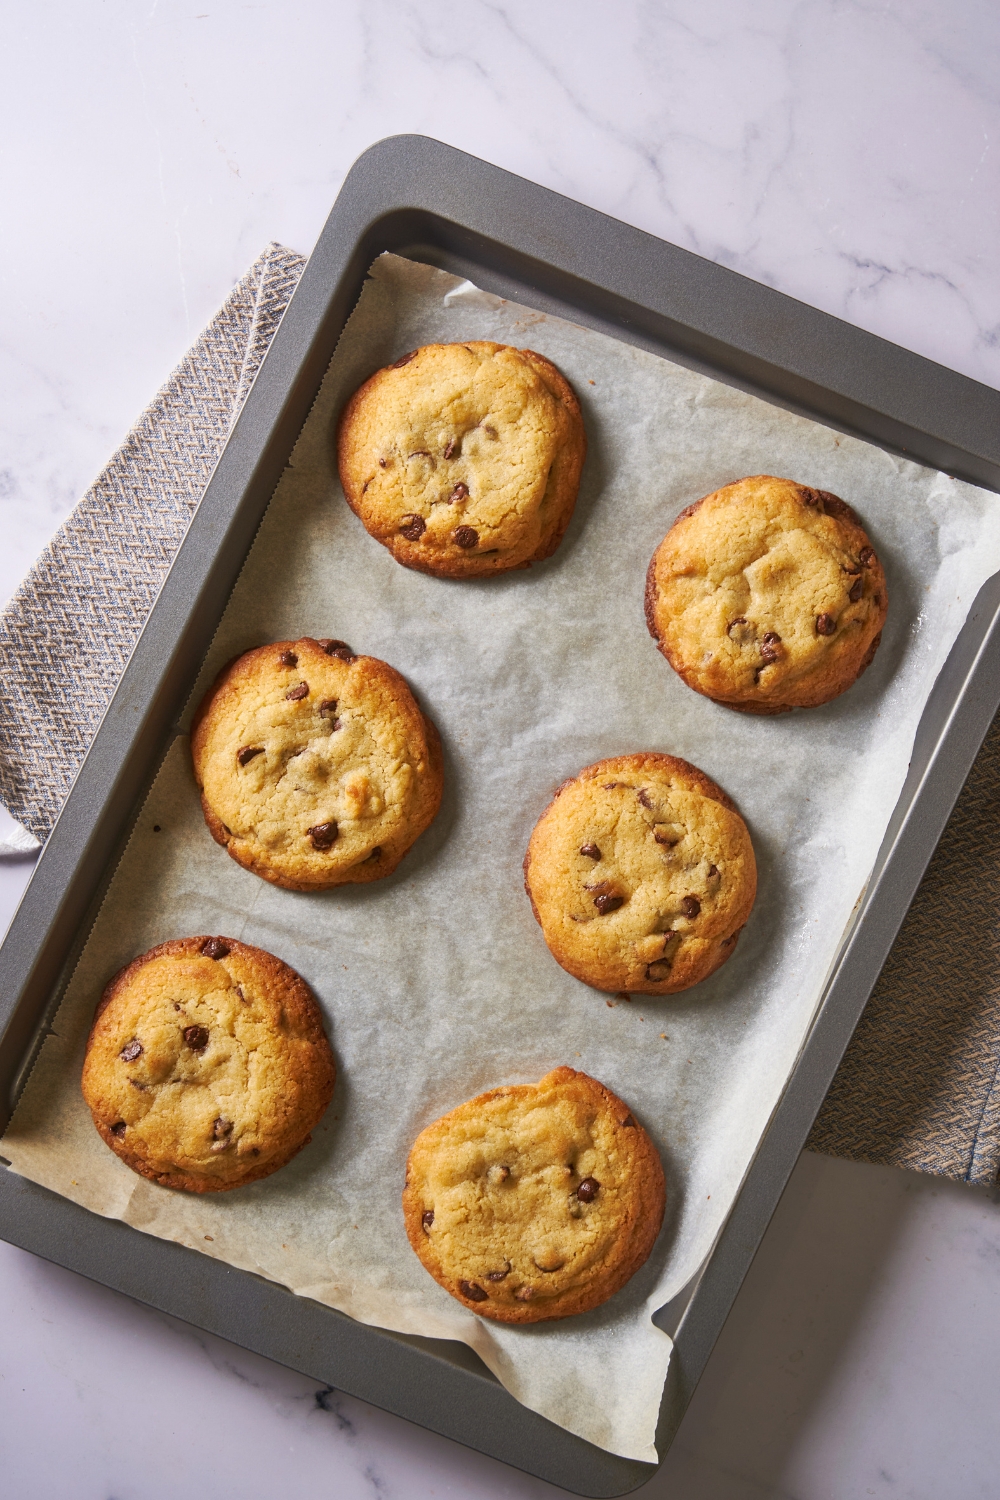 Six baked cookies on top of a baking sheet that is lined with parchment paper.